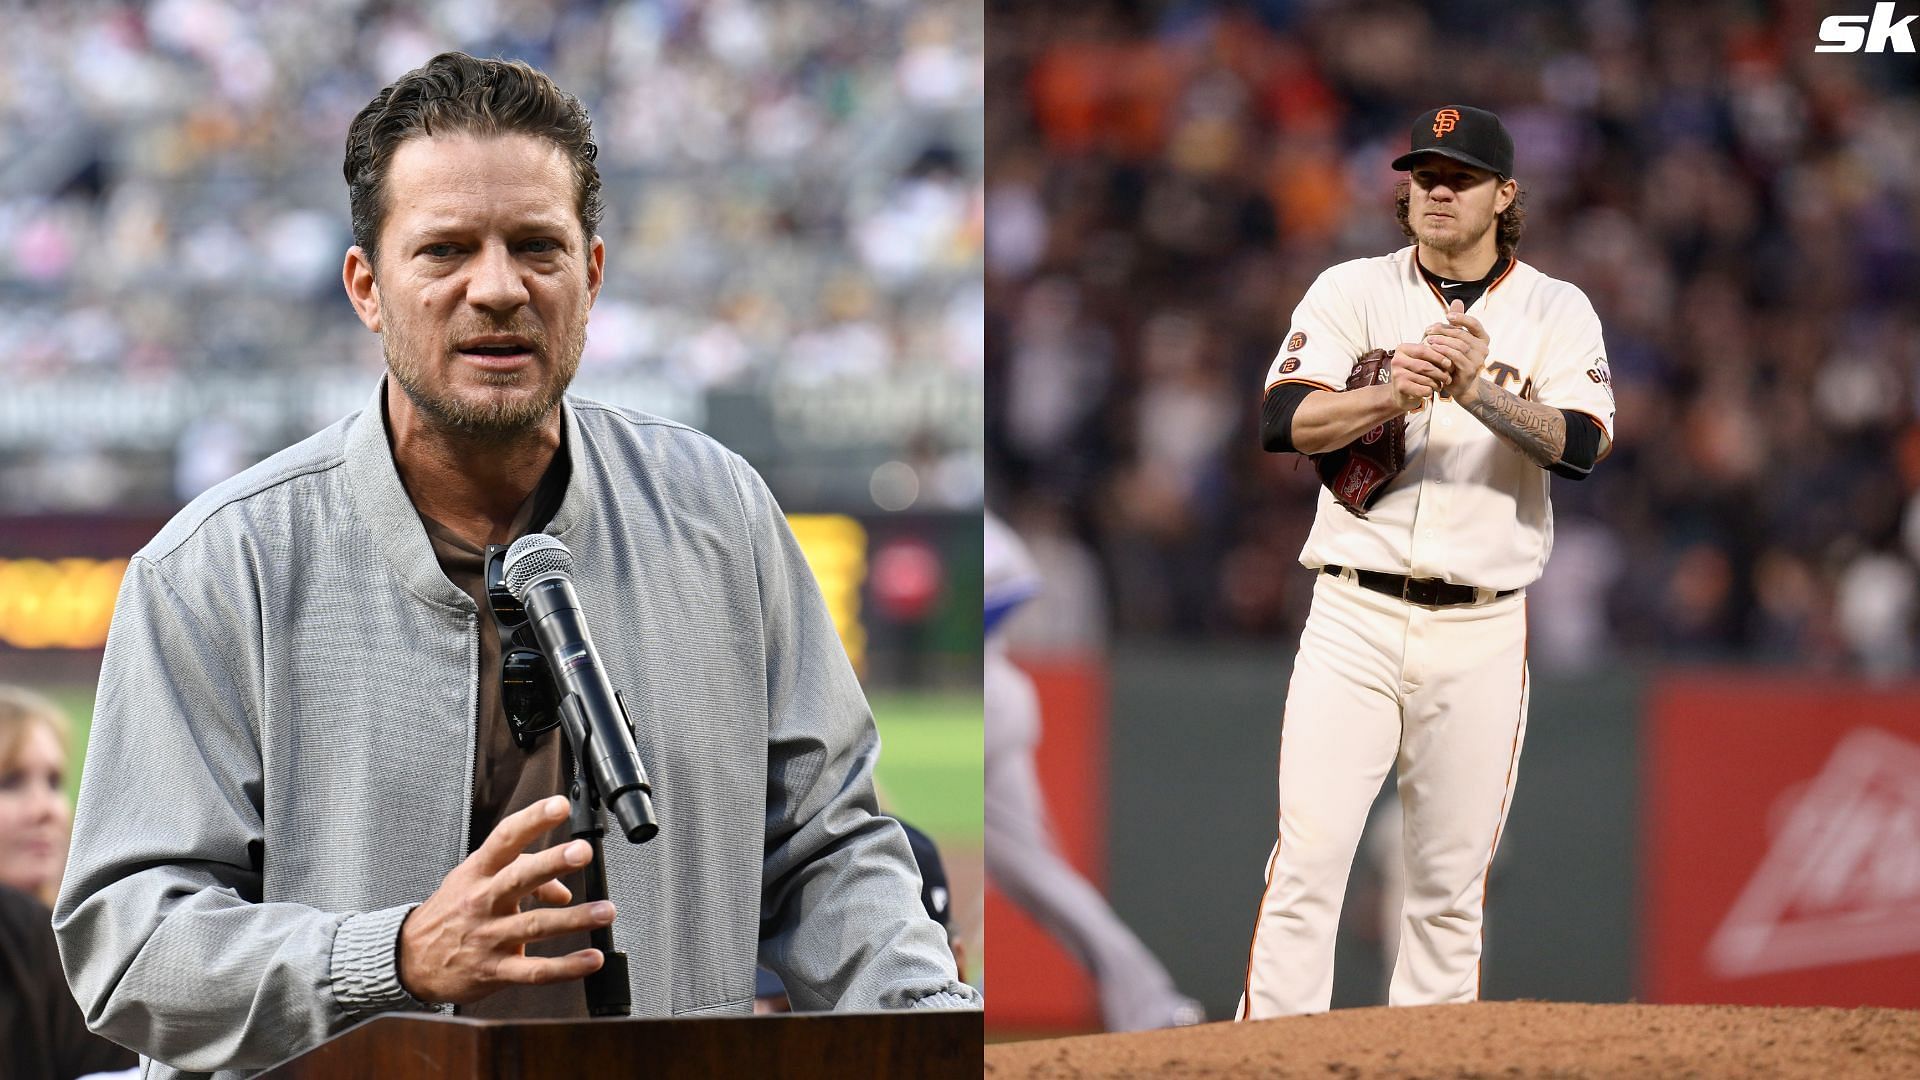 Former San Diego Padres pitcher Jake Peavy speaks at a ceremony held to induct him into the San Diego Padres Hall of Fame in July 2023